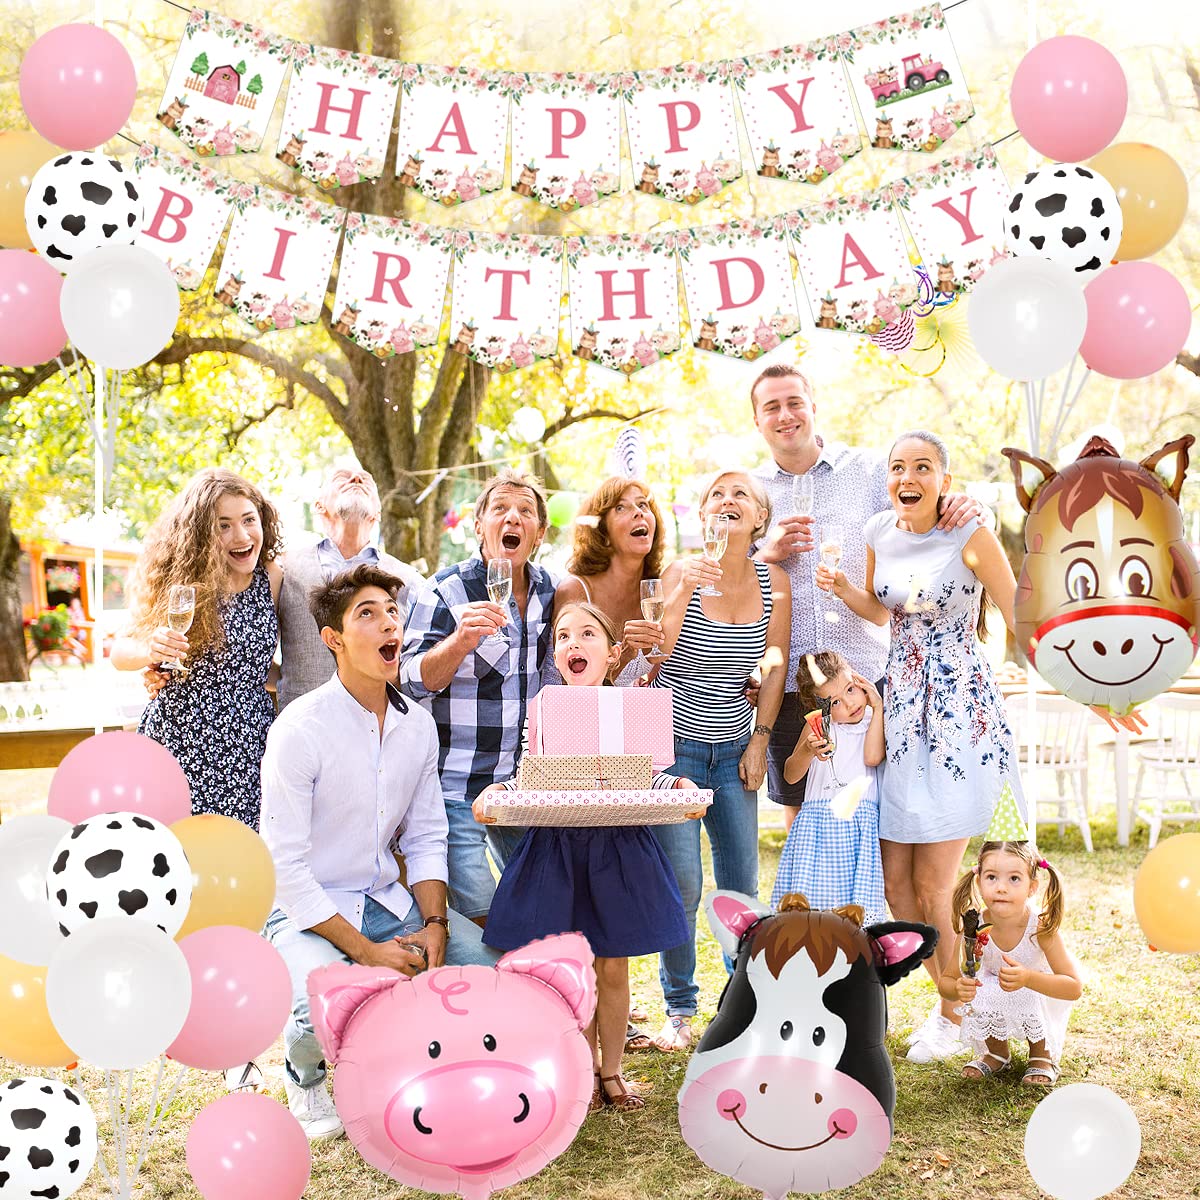 Pink Farm Animals Birthday Decorations for Girls Farmhouse Floral Theme Happy Birthday Banner Cow Pig Donkey Balloons Hanging Swirls Cake Cupcake Toppers for Kids Barnyard Theme Bday Party Supplies